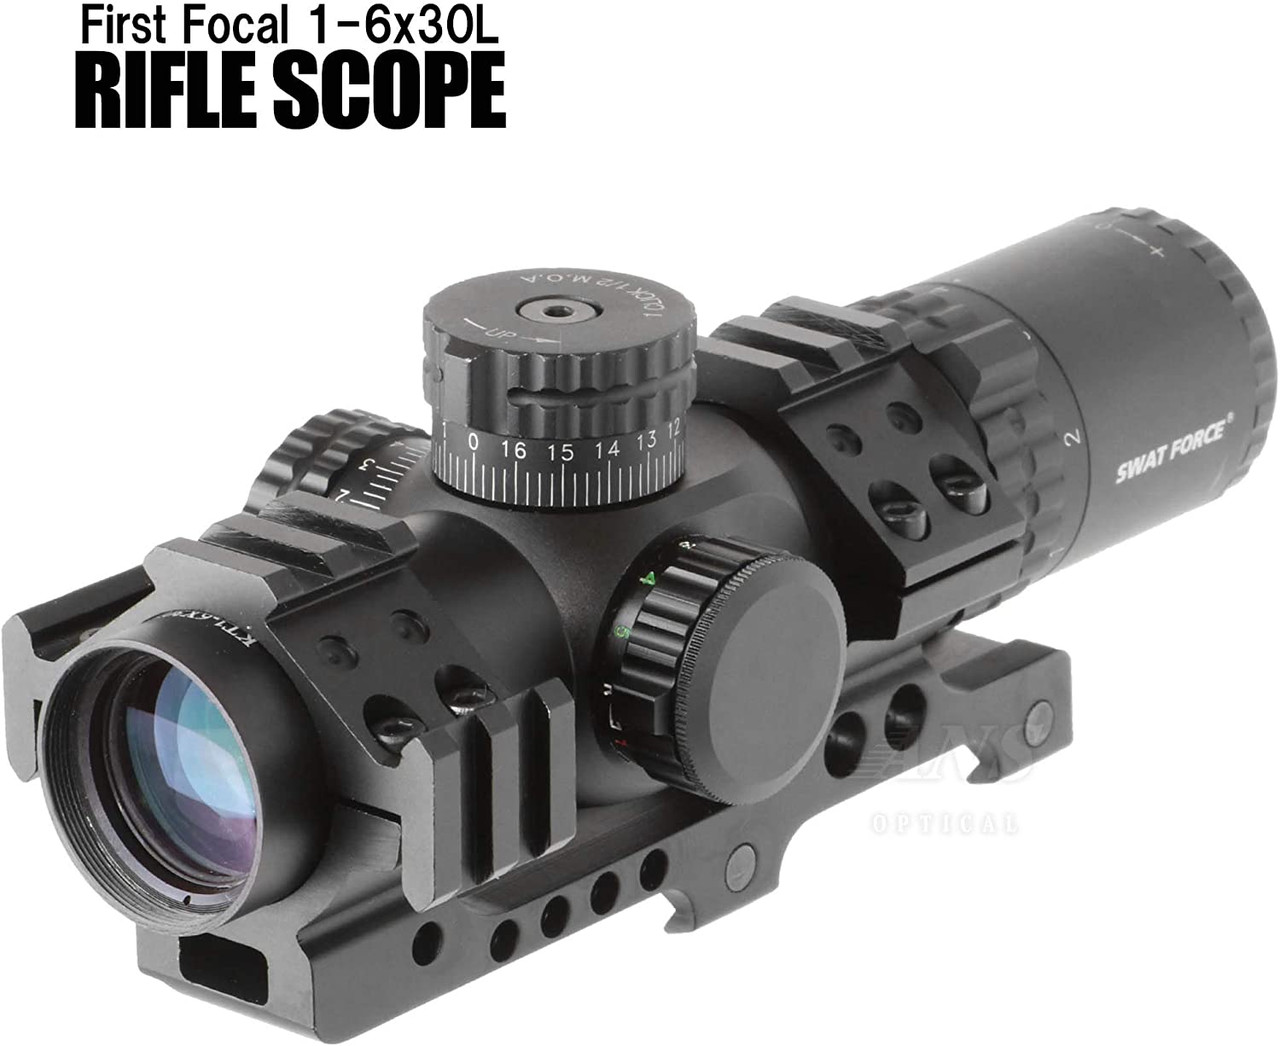 SWAT FORCE KT1-6x30L type Fast focal 1-6 magnification scope replica